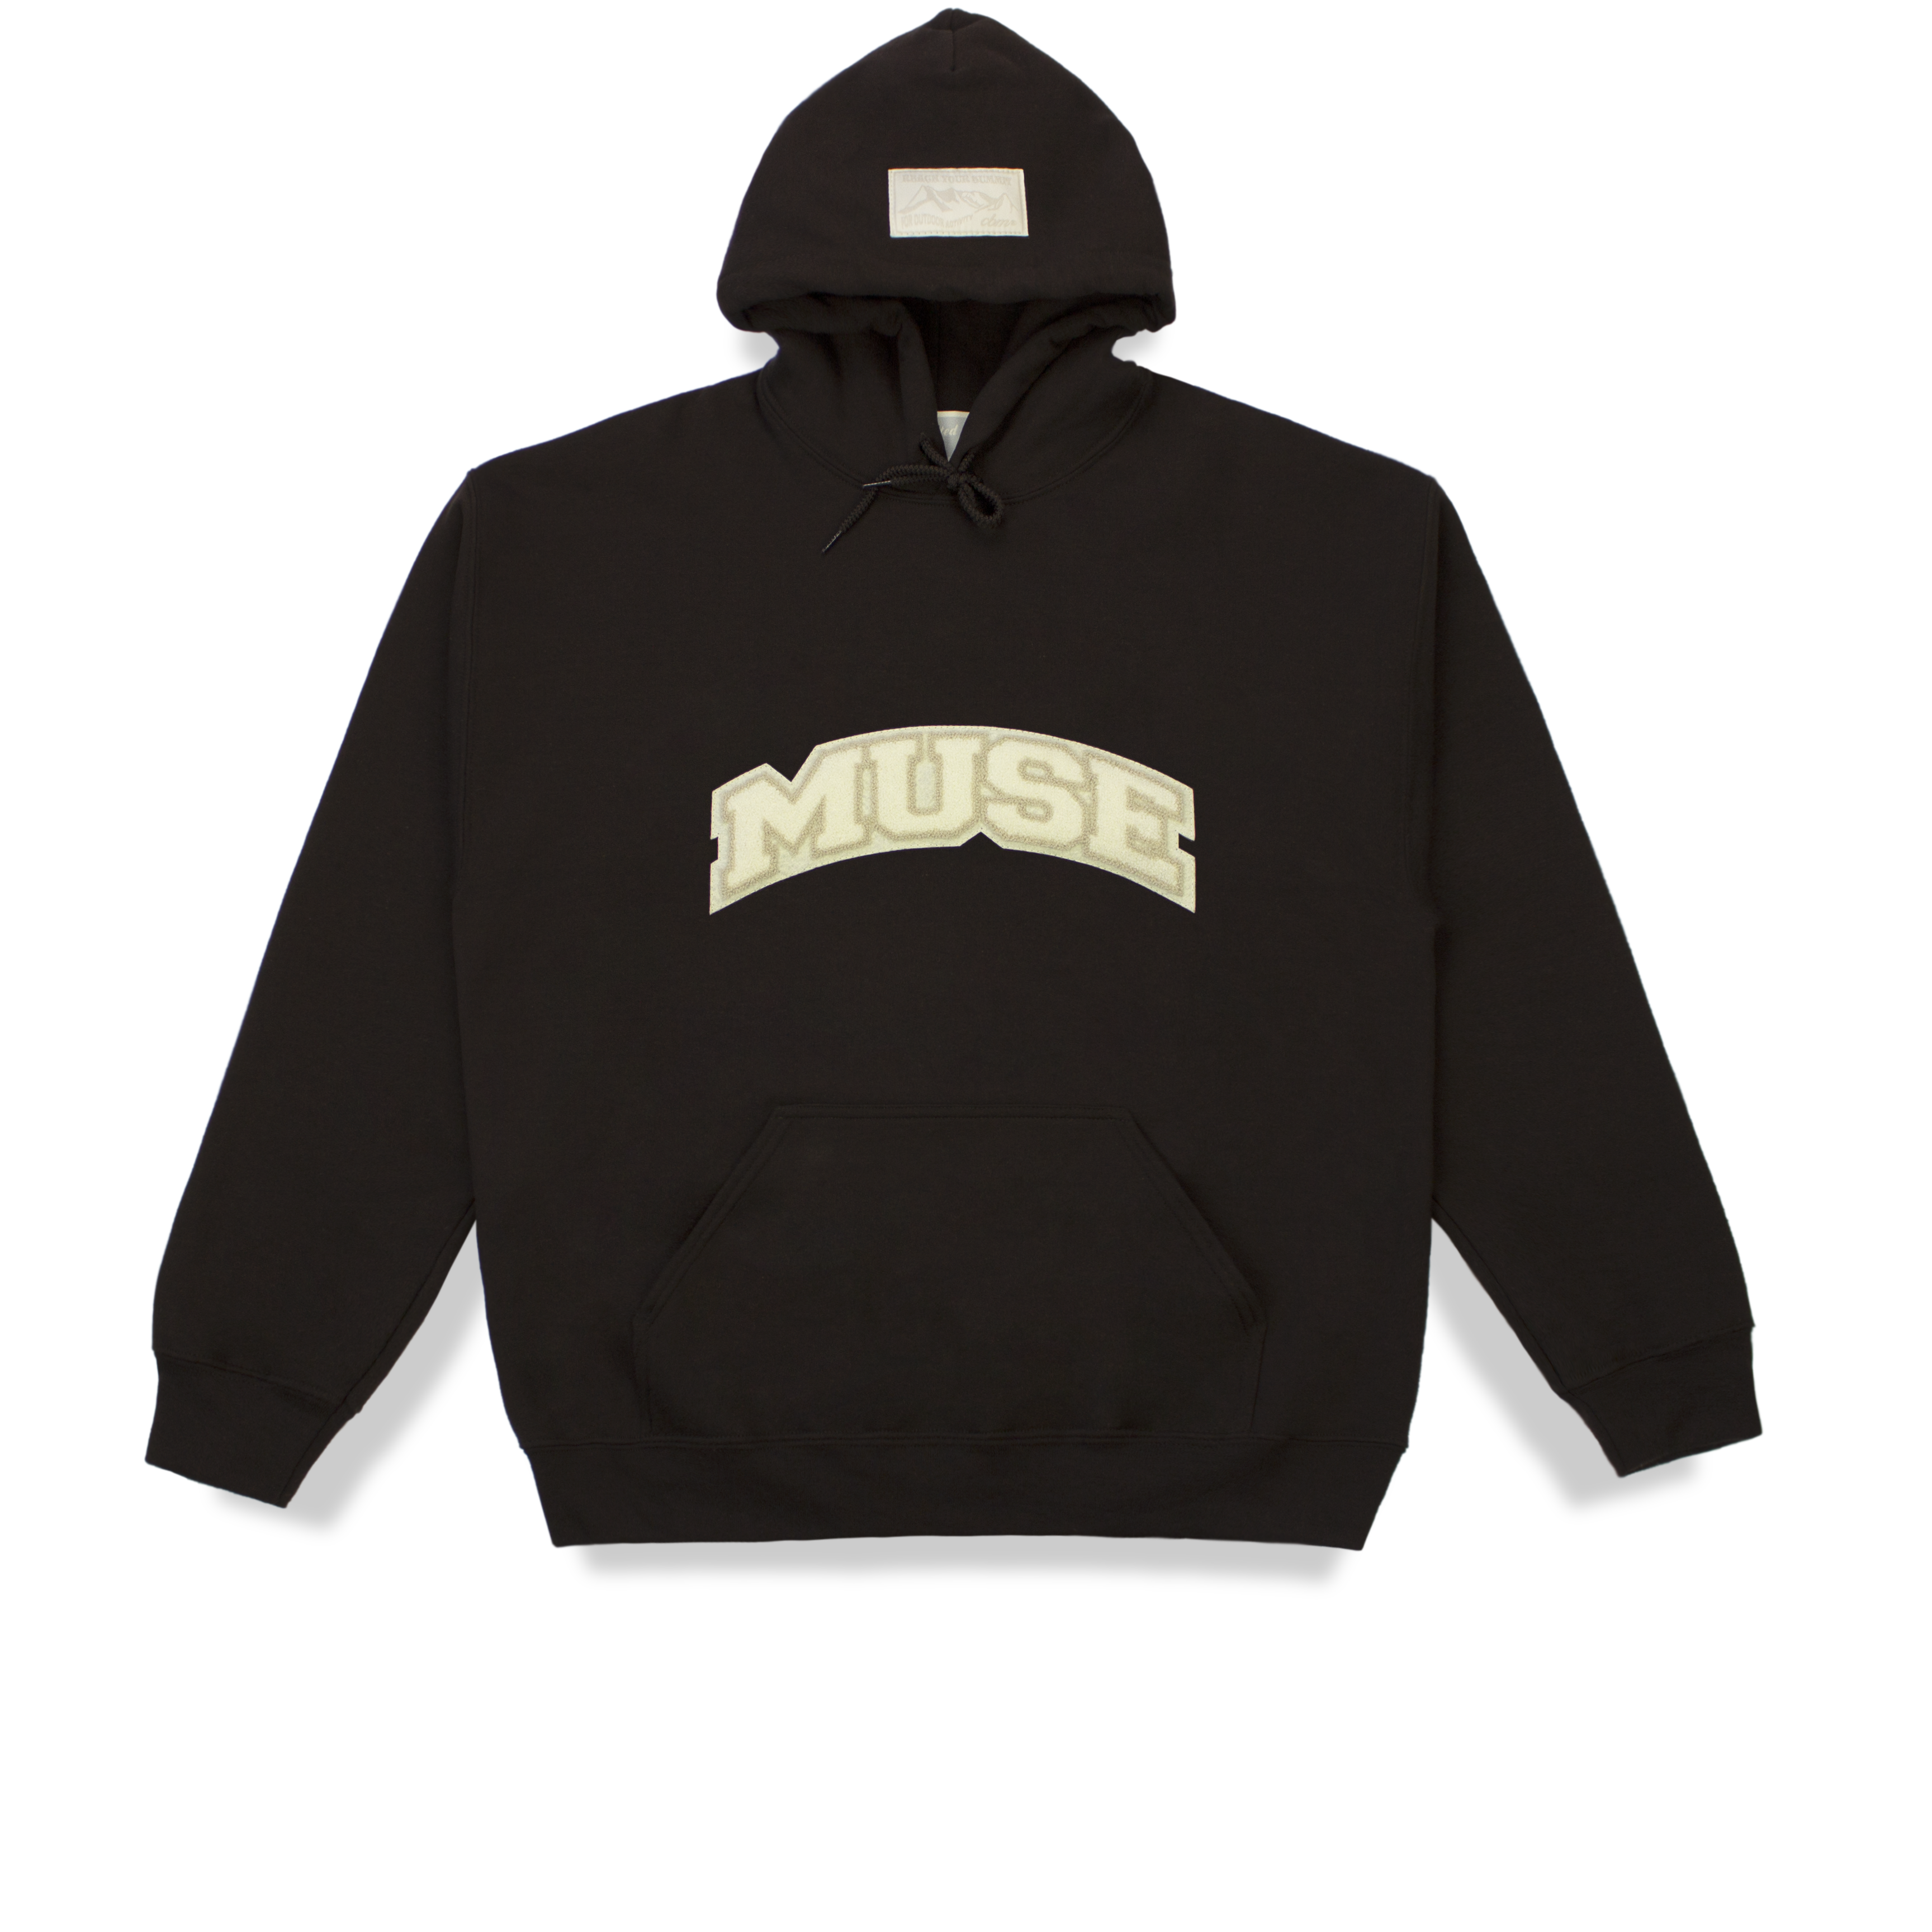 OG Chenille Hoodie - Brown Oyster